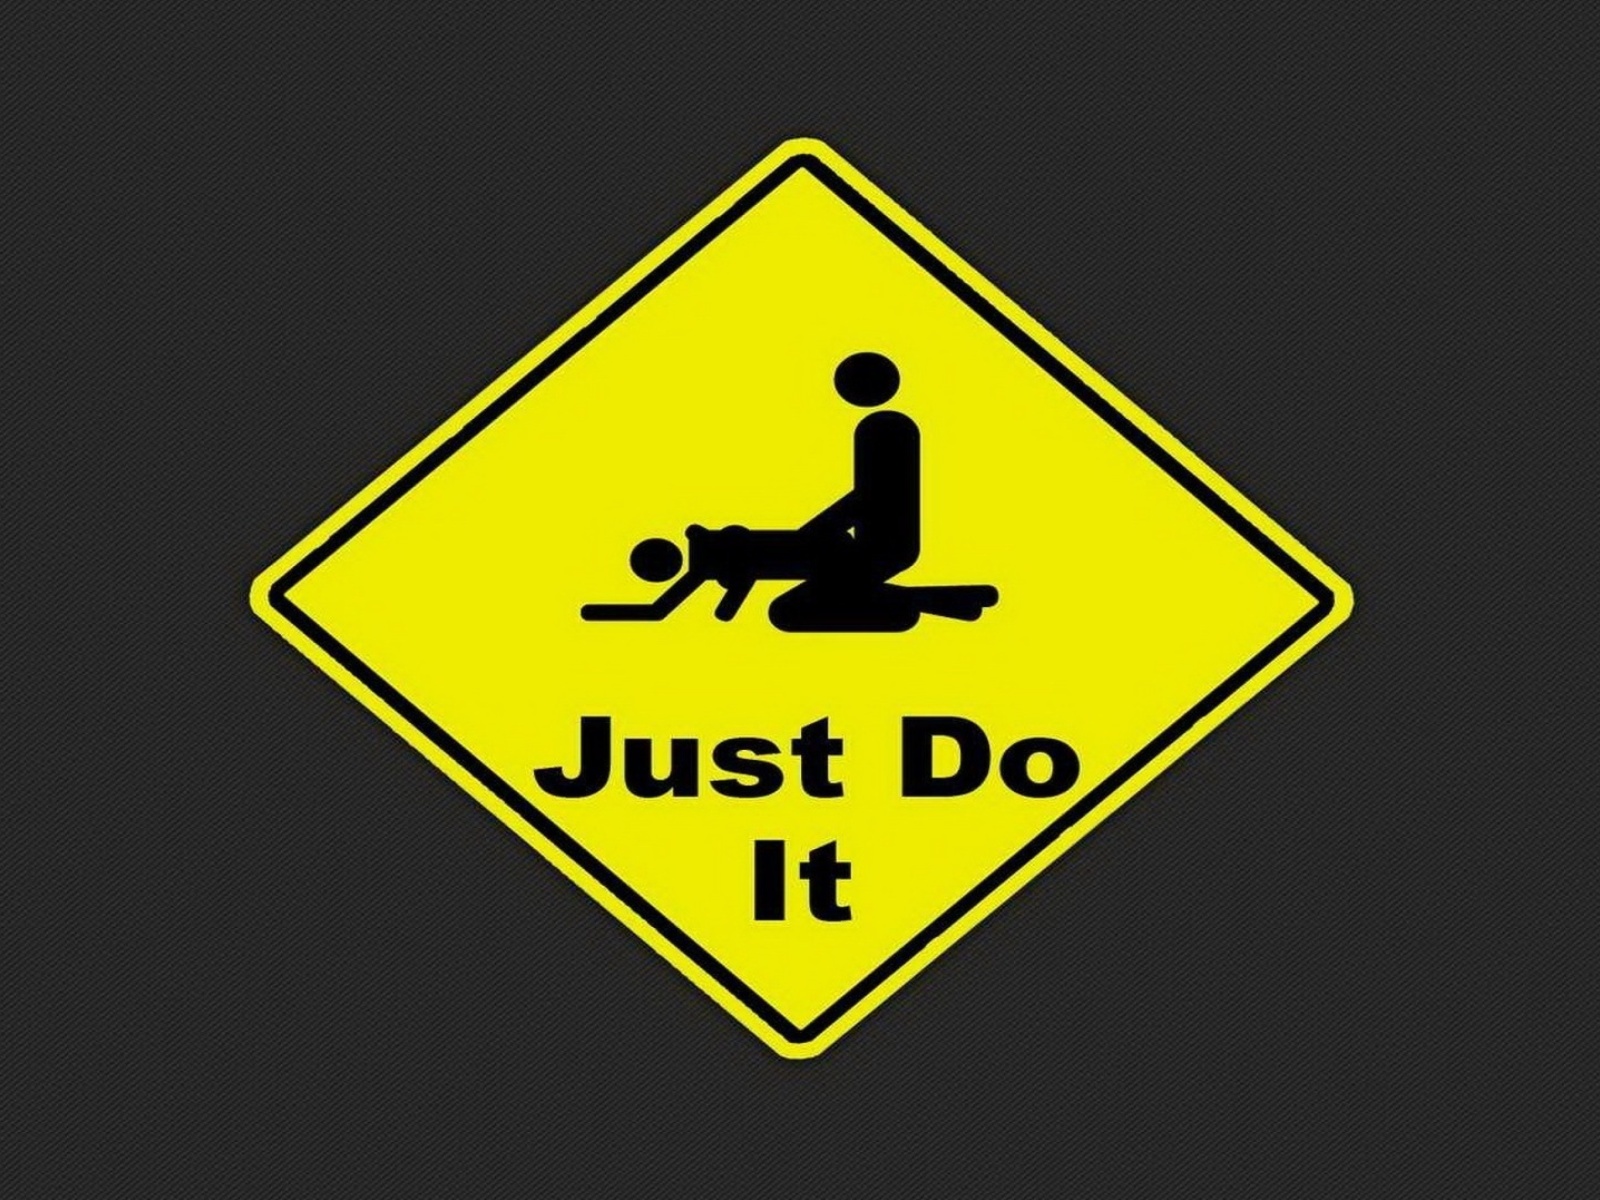 Just Do It Funny Sign wallpaper 1600x1200